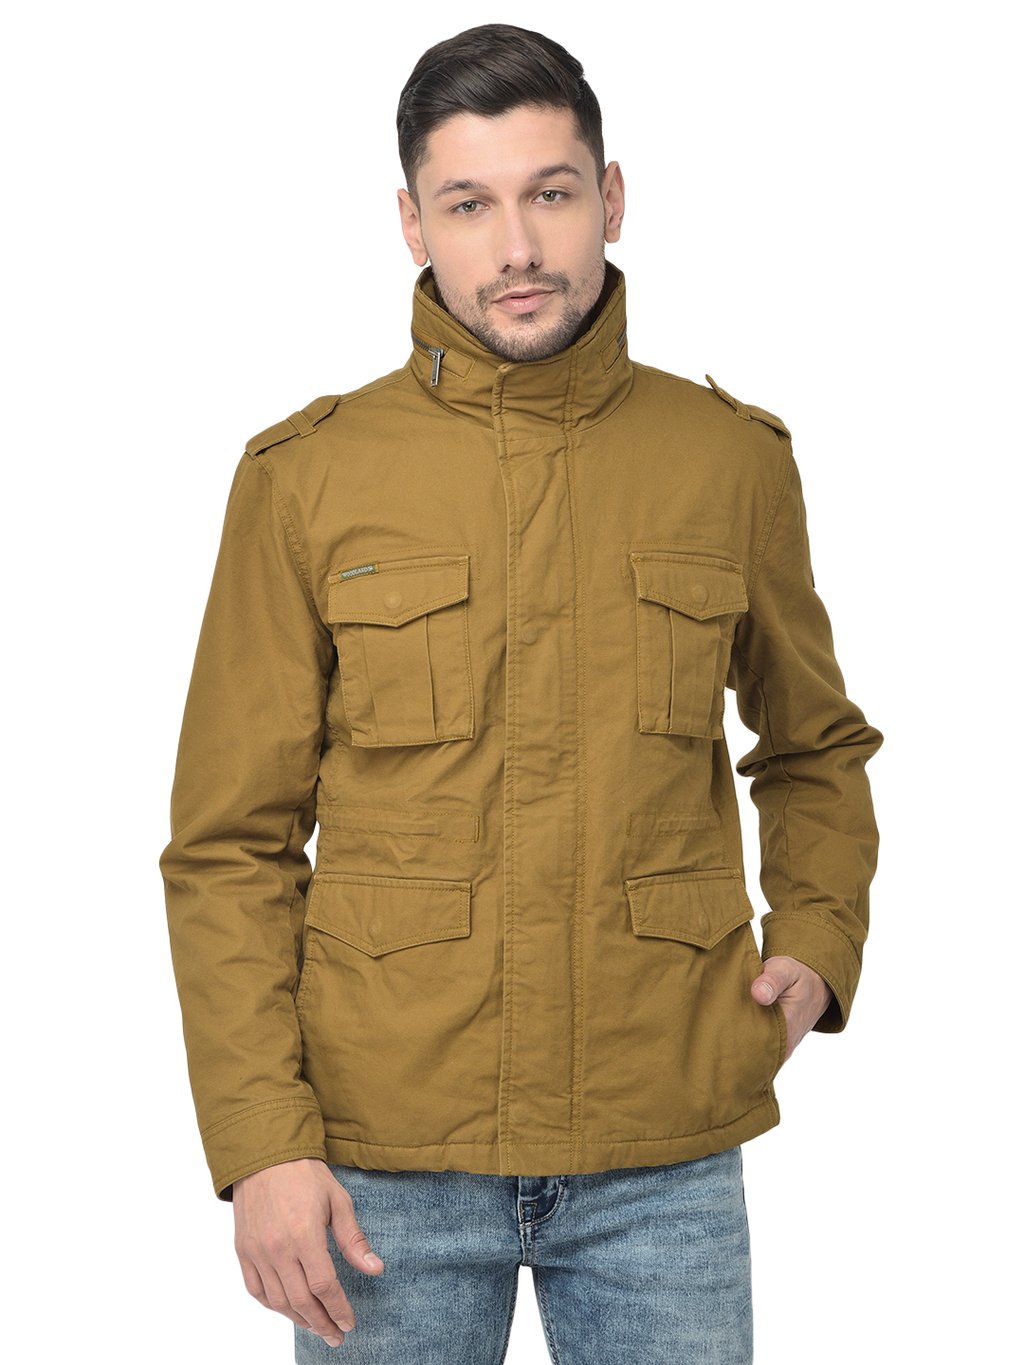 Cotton Mens Jackets :Buy Cotton Mens Jackets Online at Low Prices on  Snapdeal